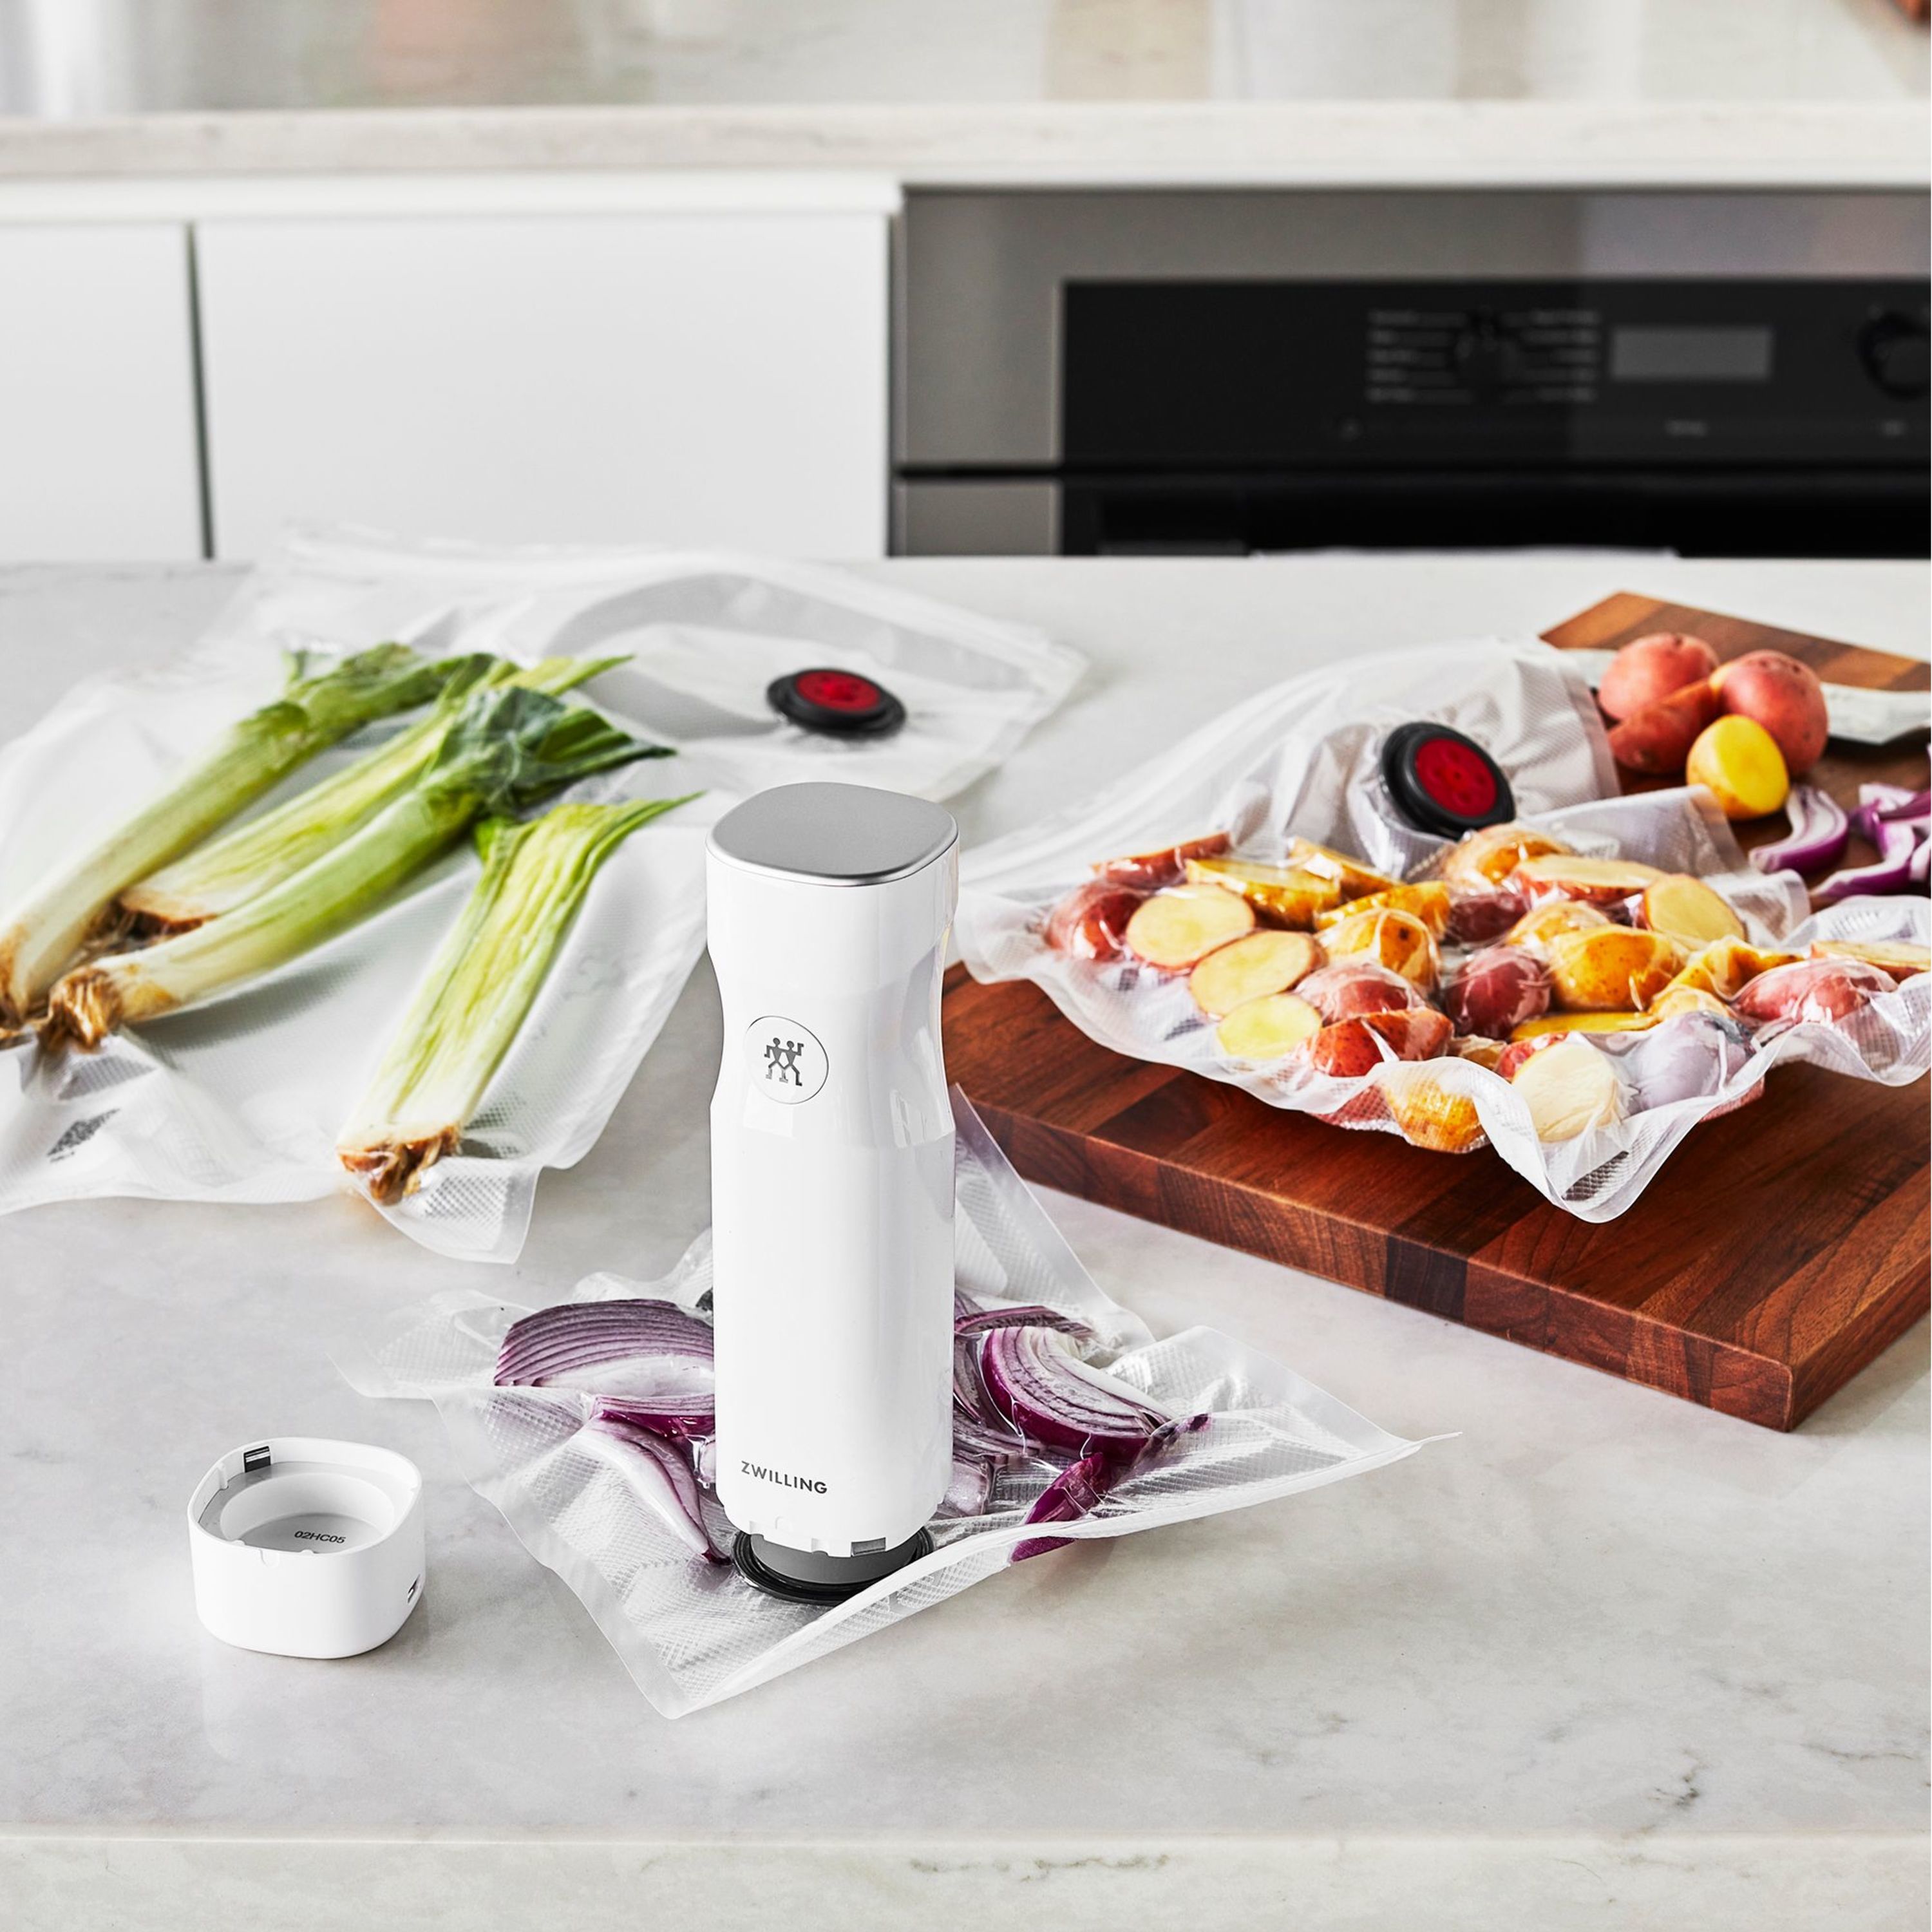 Zwilling Fresh & Save Review: Will This Vacuum Sealing System Keep Your  Produce Fresher Longer?